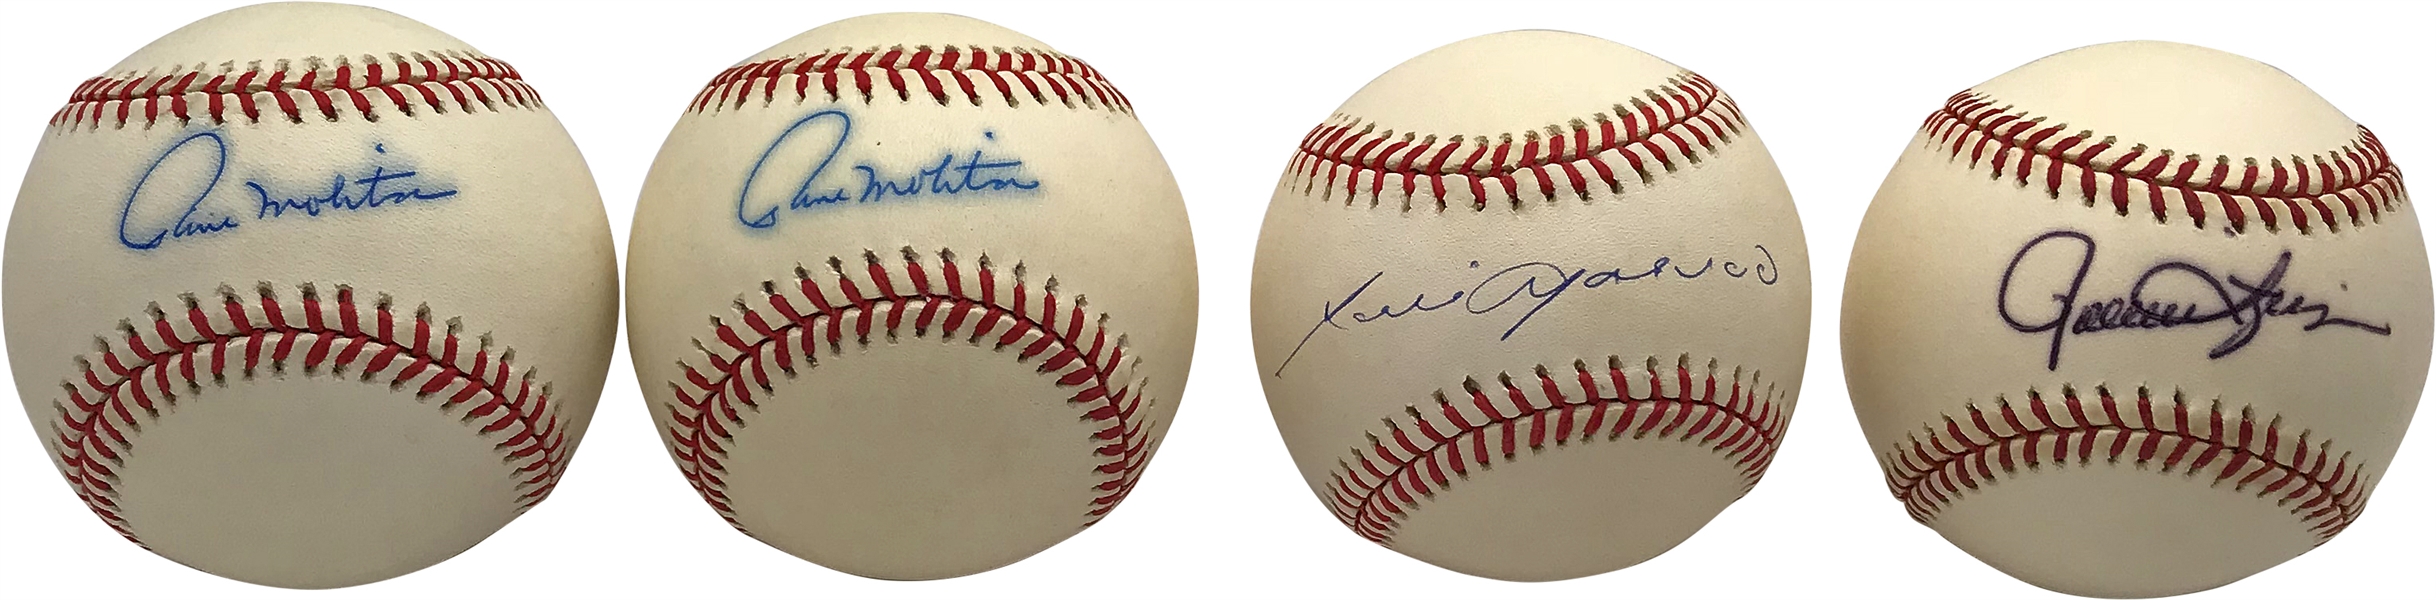 Lot of Eight (8) MLB Star Signed Baseballs w/ Molitor, Yount & Others! (Beckett/BAS Guaranteed)